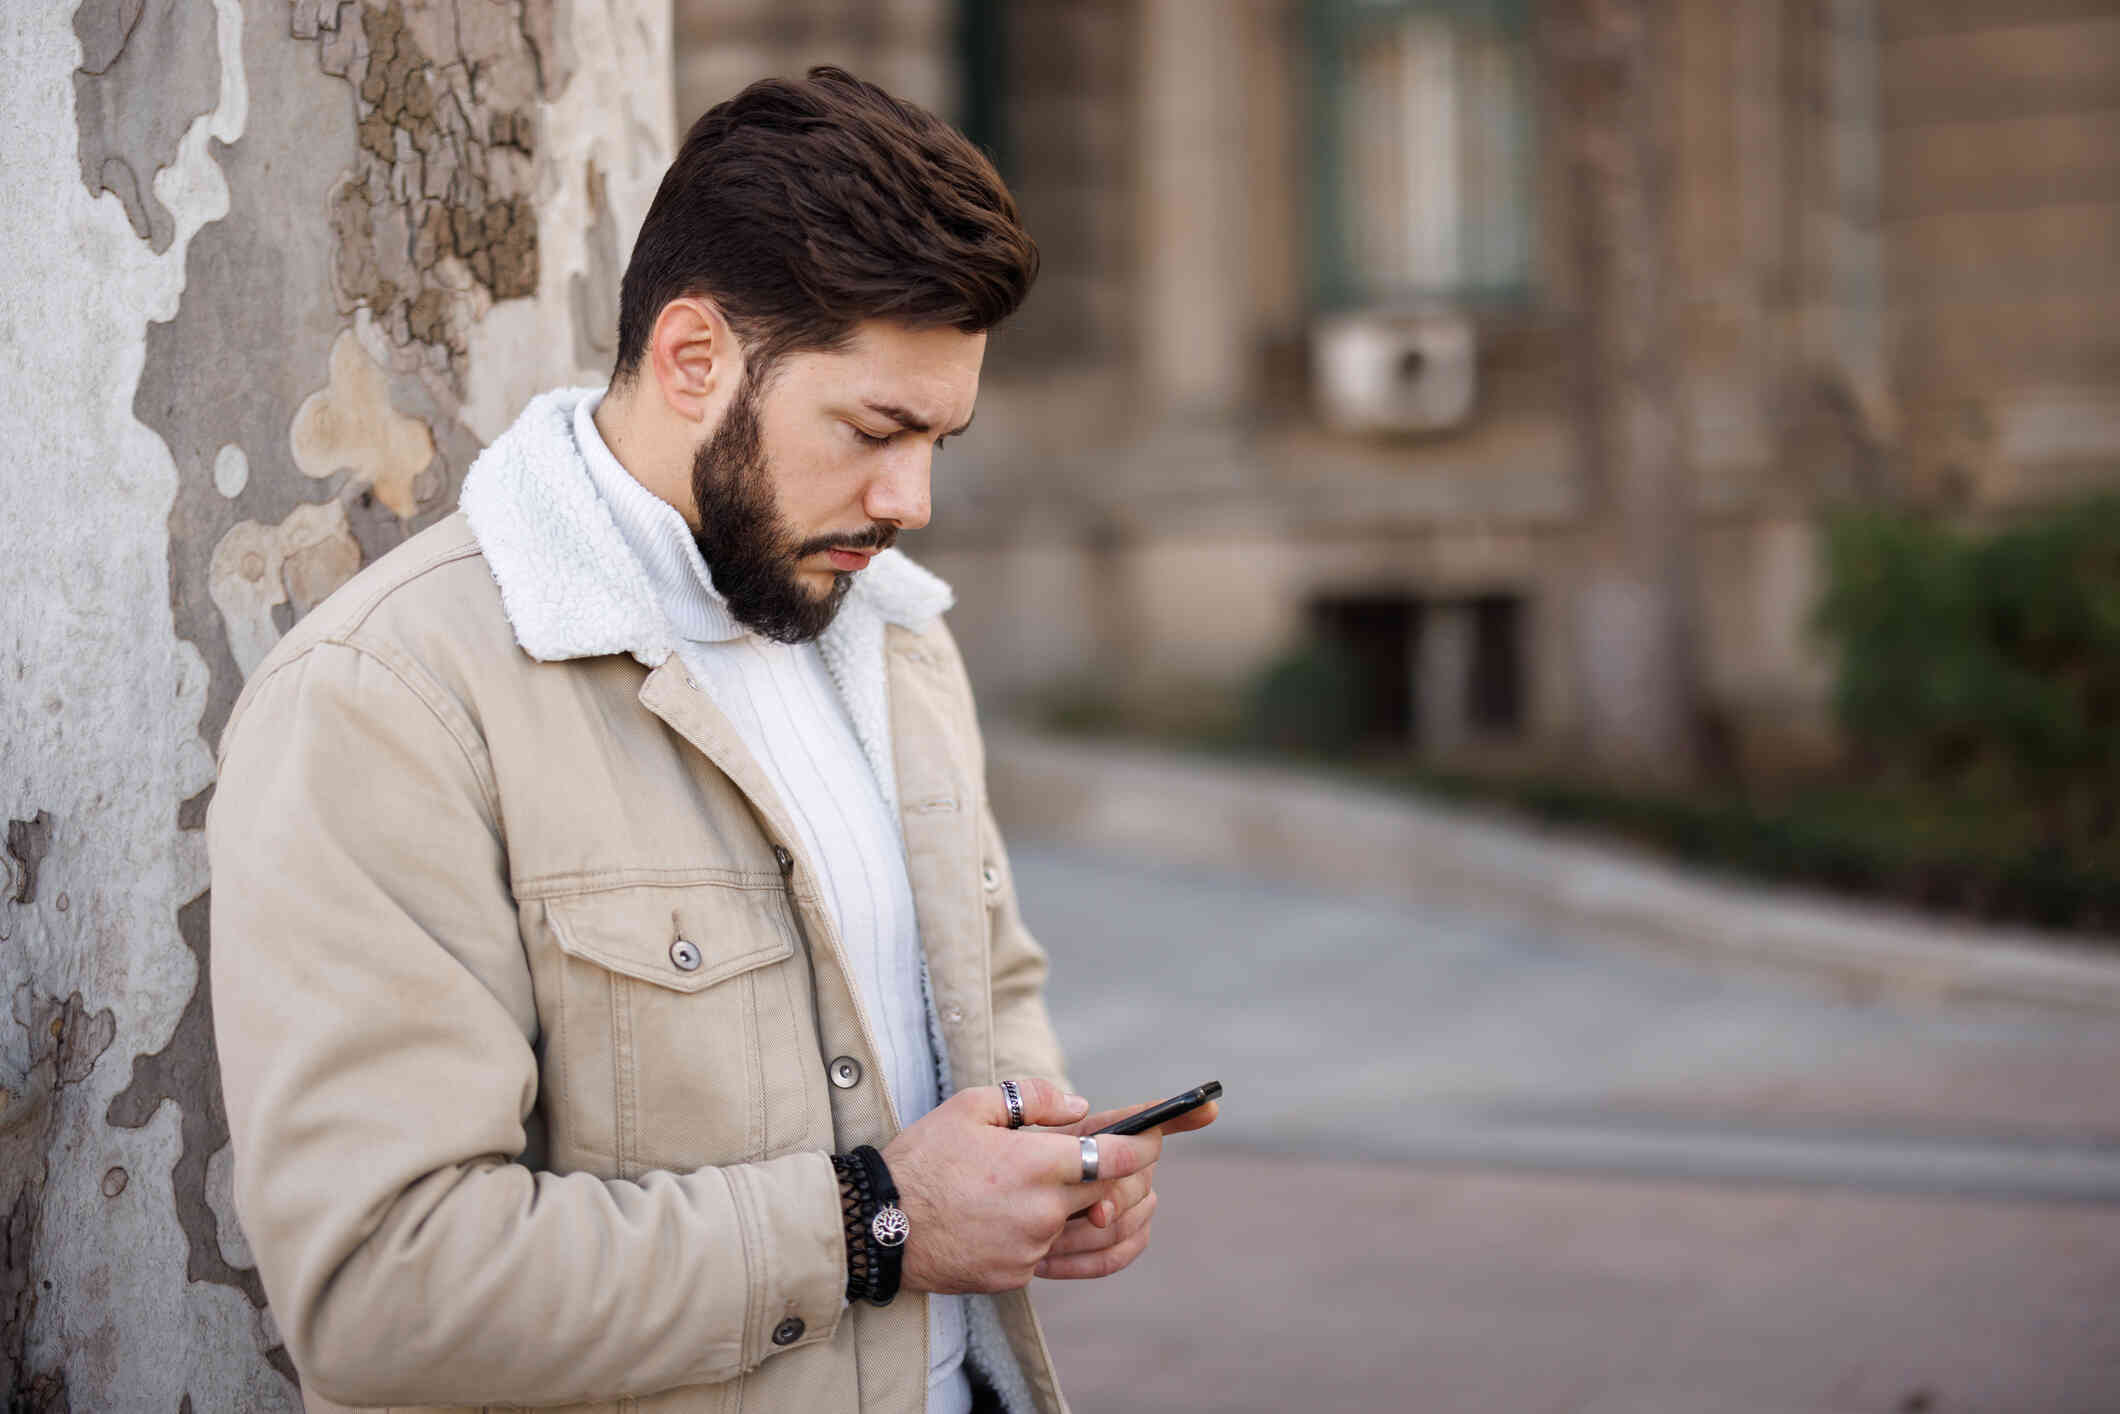 A man in a tan jacket stands outside near a cement wall and looks down at the cellphone in his hands with a serious expression.